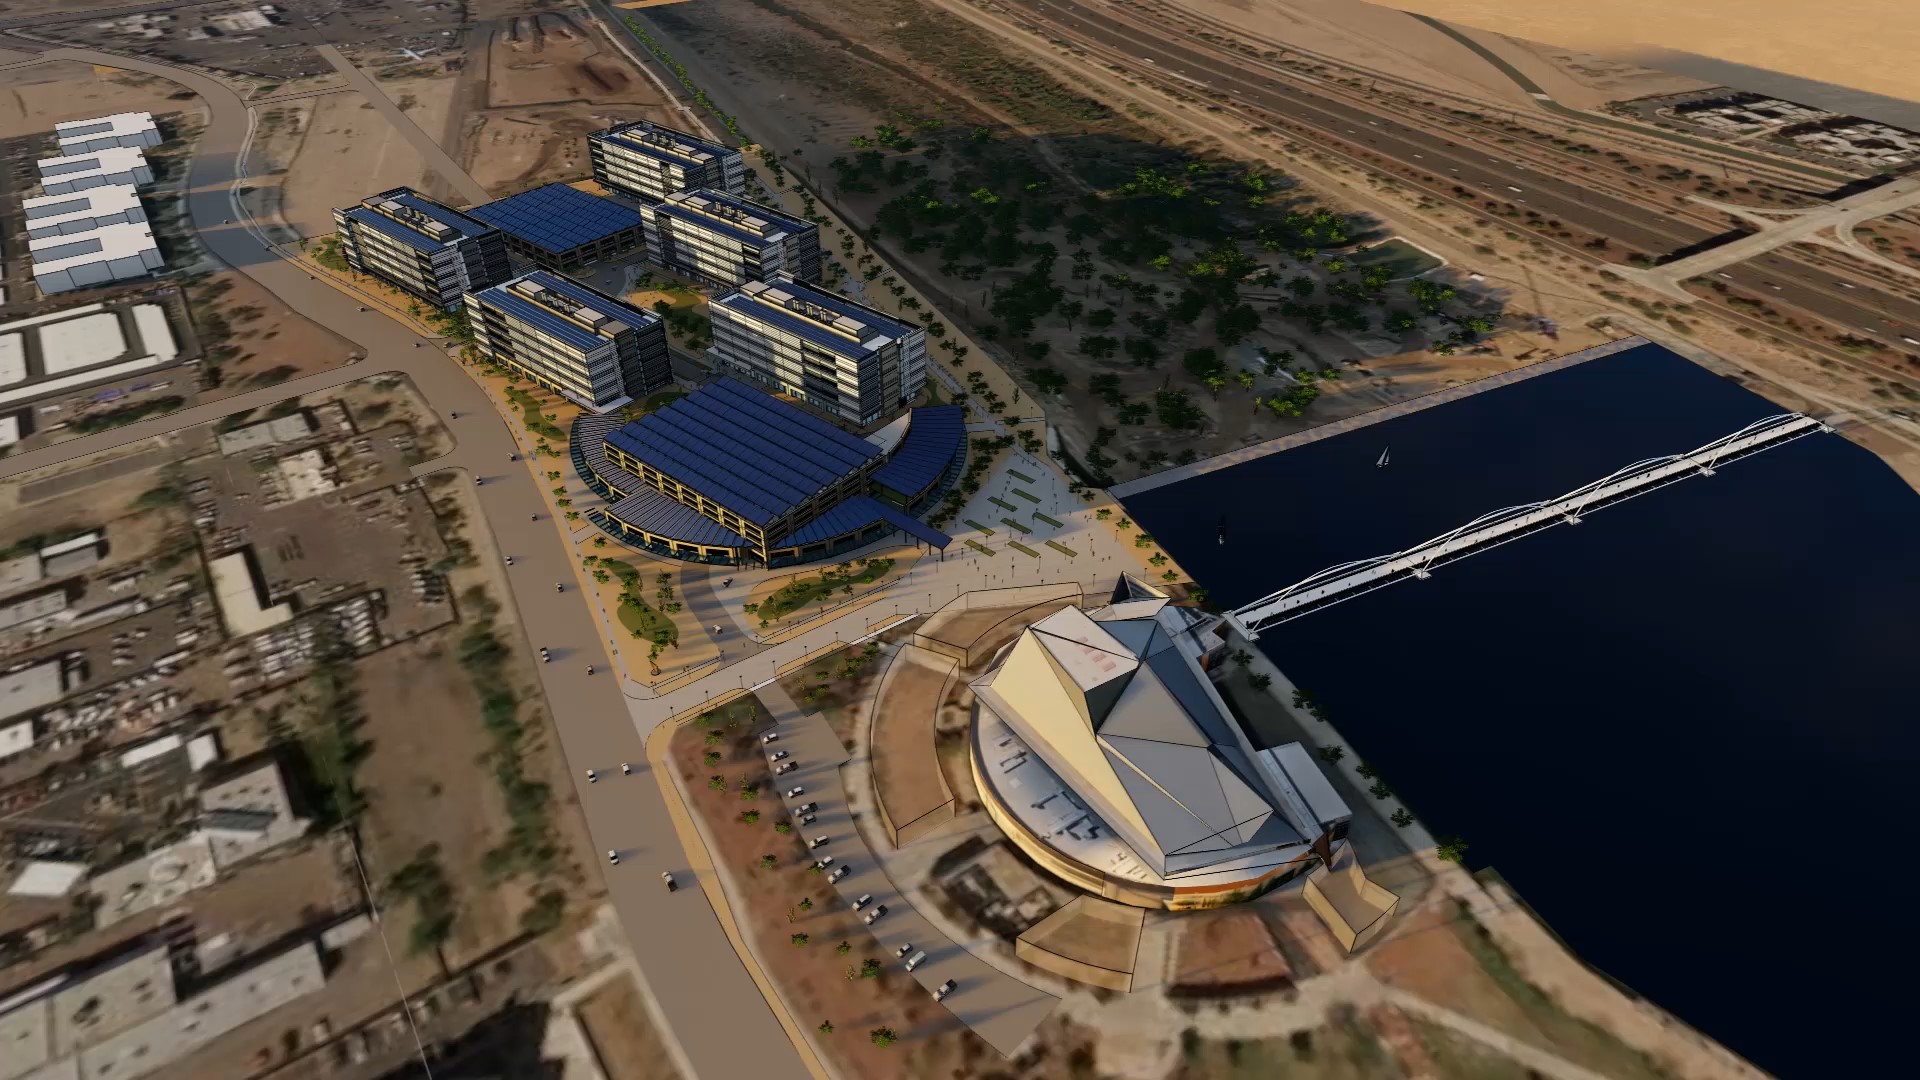 City of Tempe plans its first biomed and tech campus